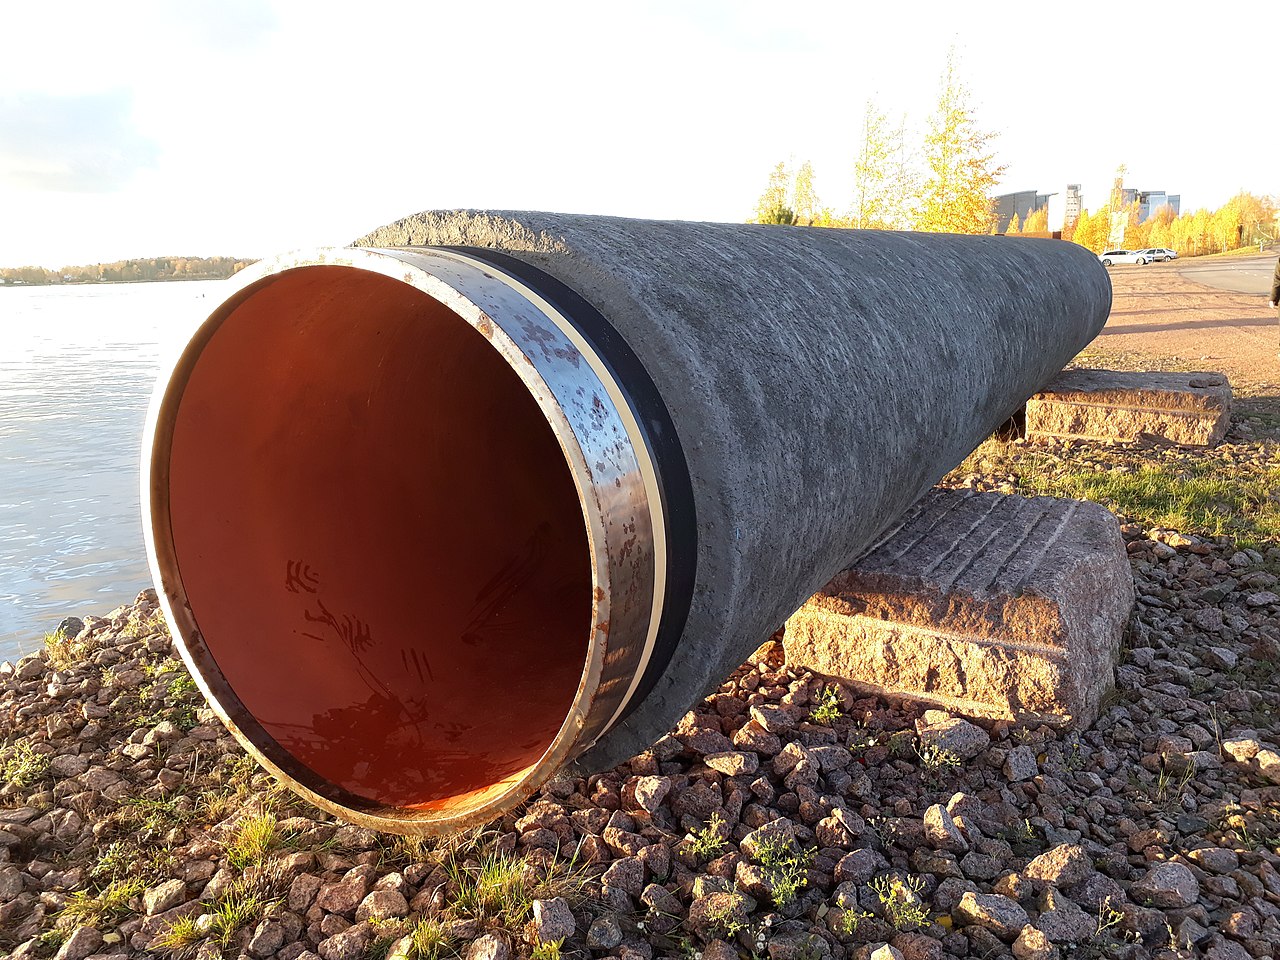 A piece of Nord Stream gas pipe on public display in Kotka, Finland